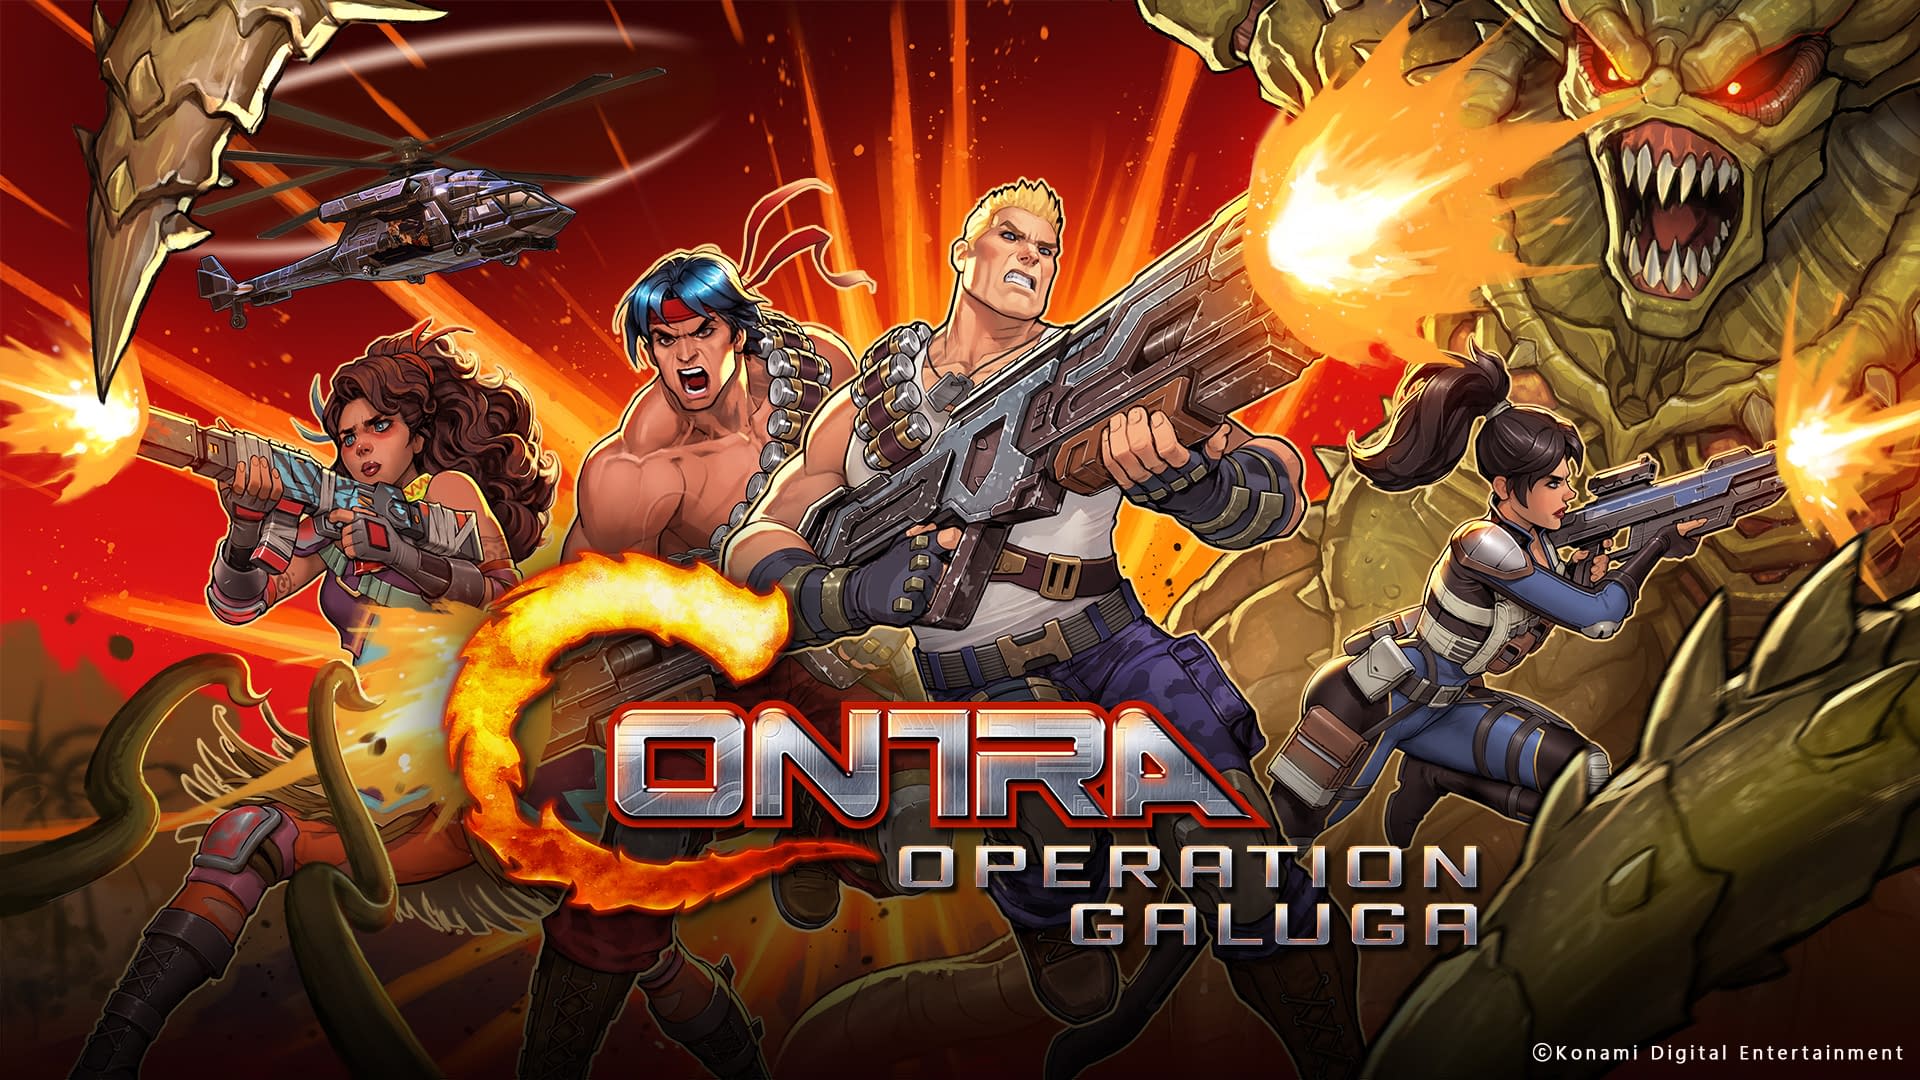 Contra: Operation Galuga Takes On March 12